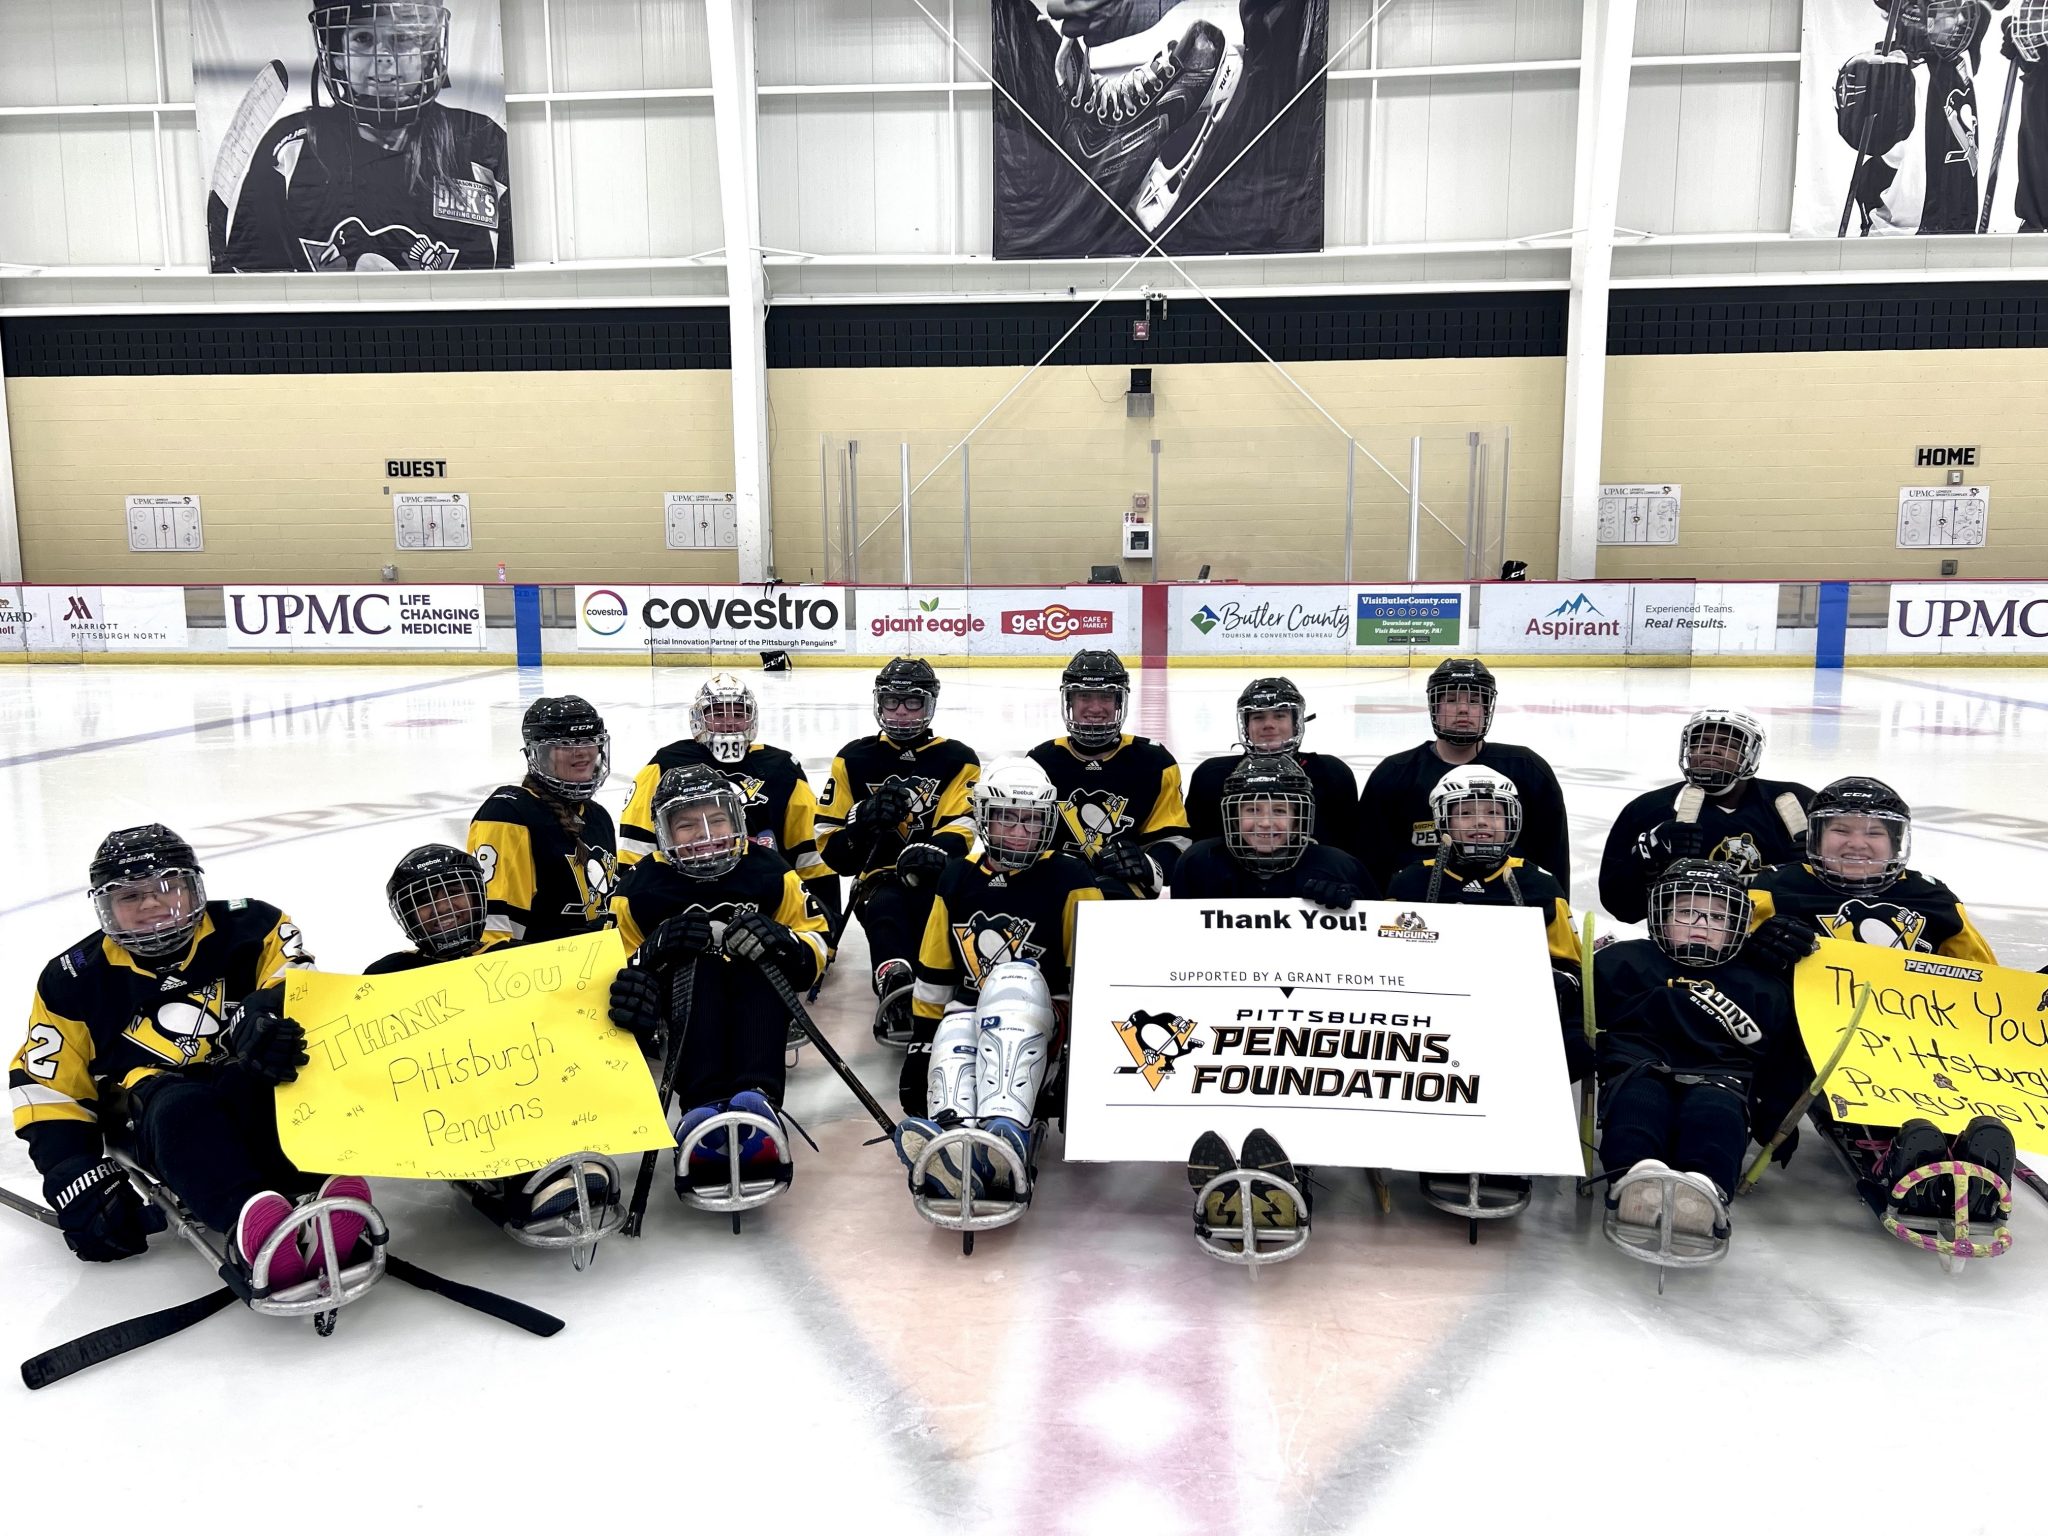 Pittsburgh Penguins Foundation 2020.21 Community Report by